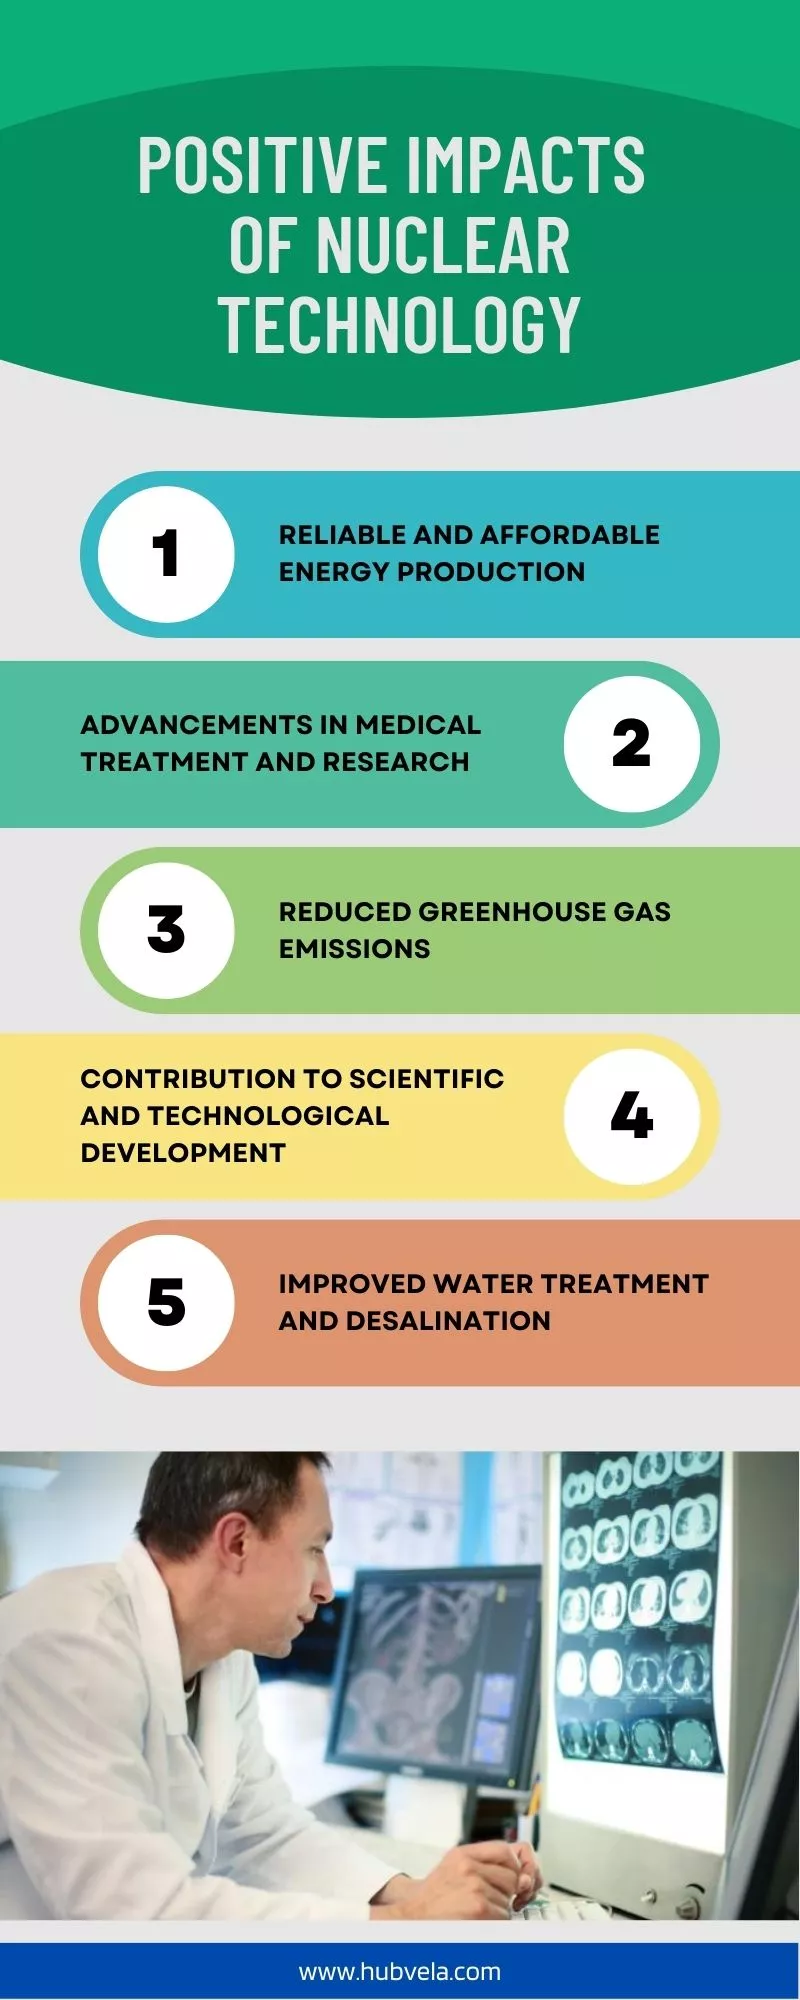 Positive Impacts of Nuclear Technology infographic